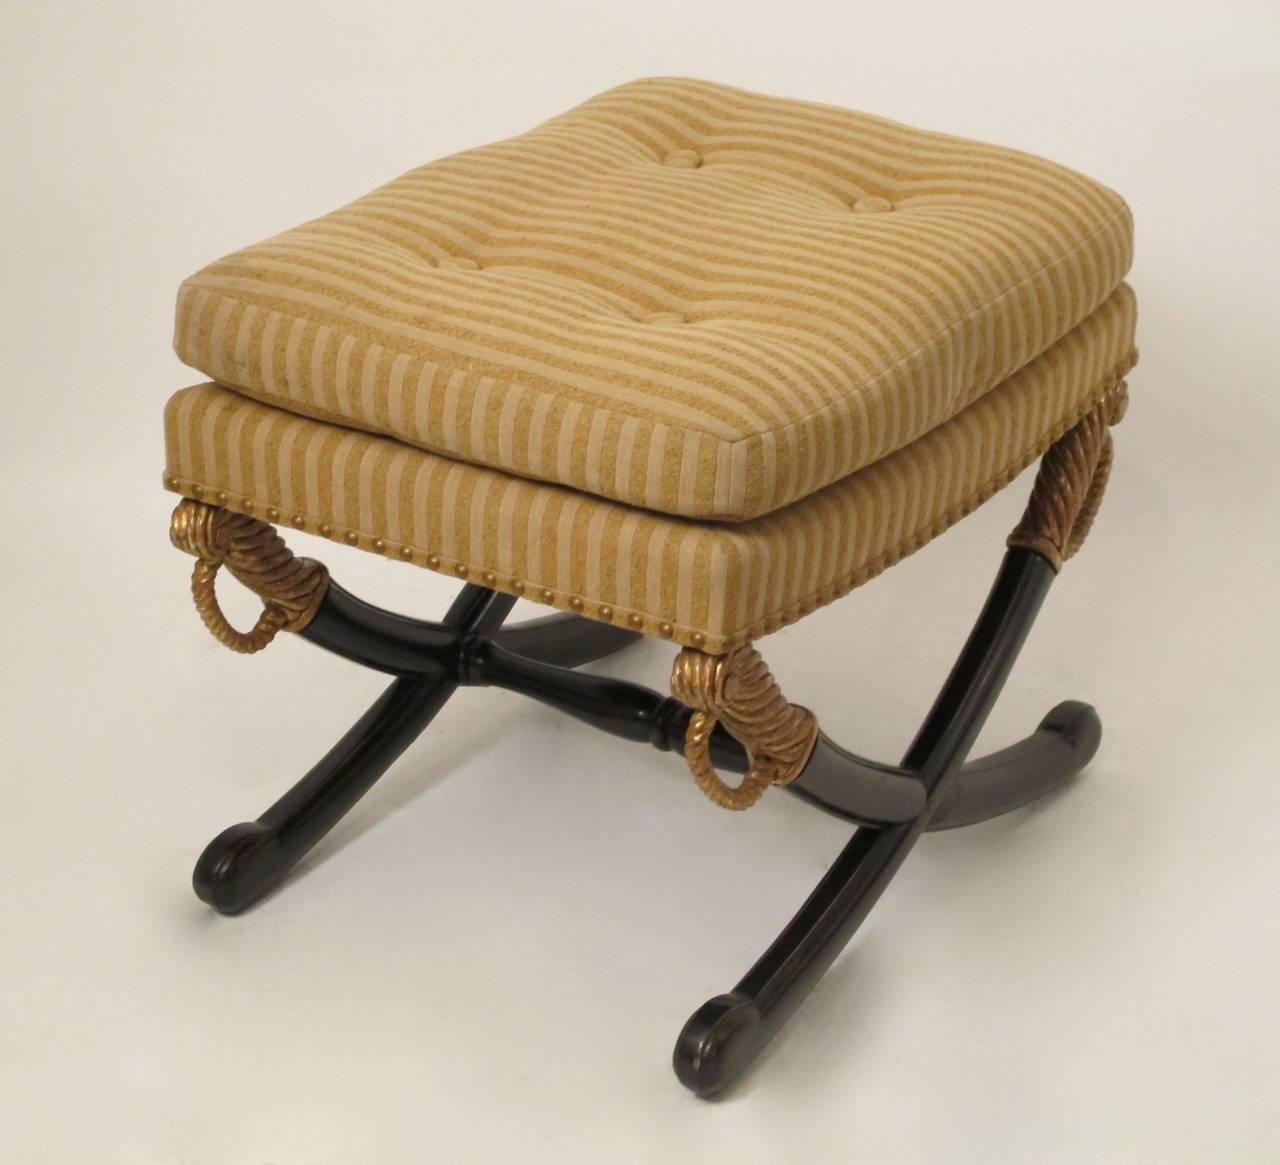 Ebonized saber leg ottoman or stool with gilt handles supporting the upholstered seat with button tufting. Has original old metal bracing on the legs, paint and gilding redone in the 20th century, seat cushion is down, upholstery is vintage and